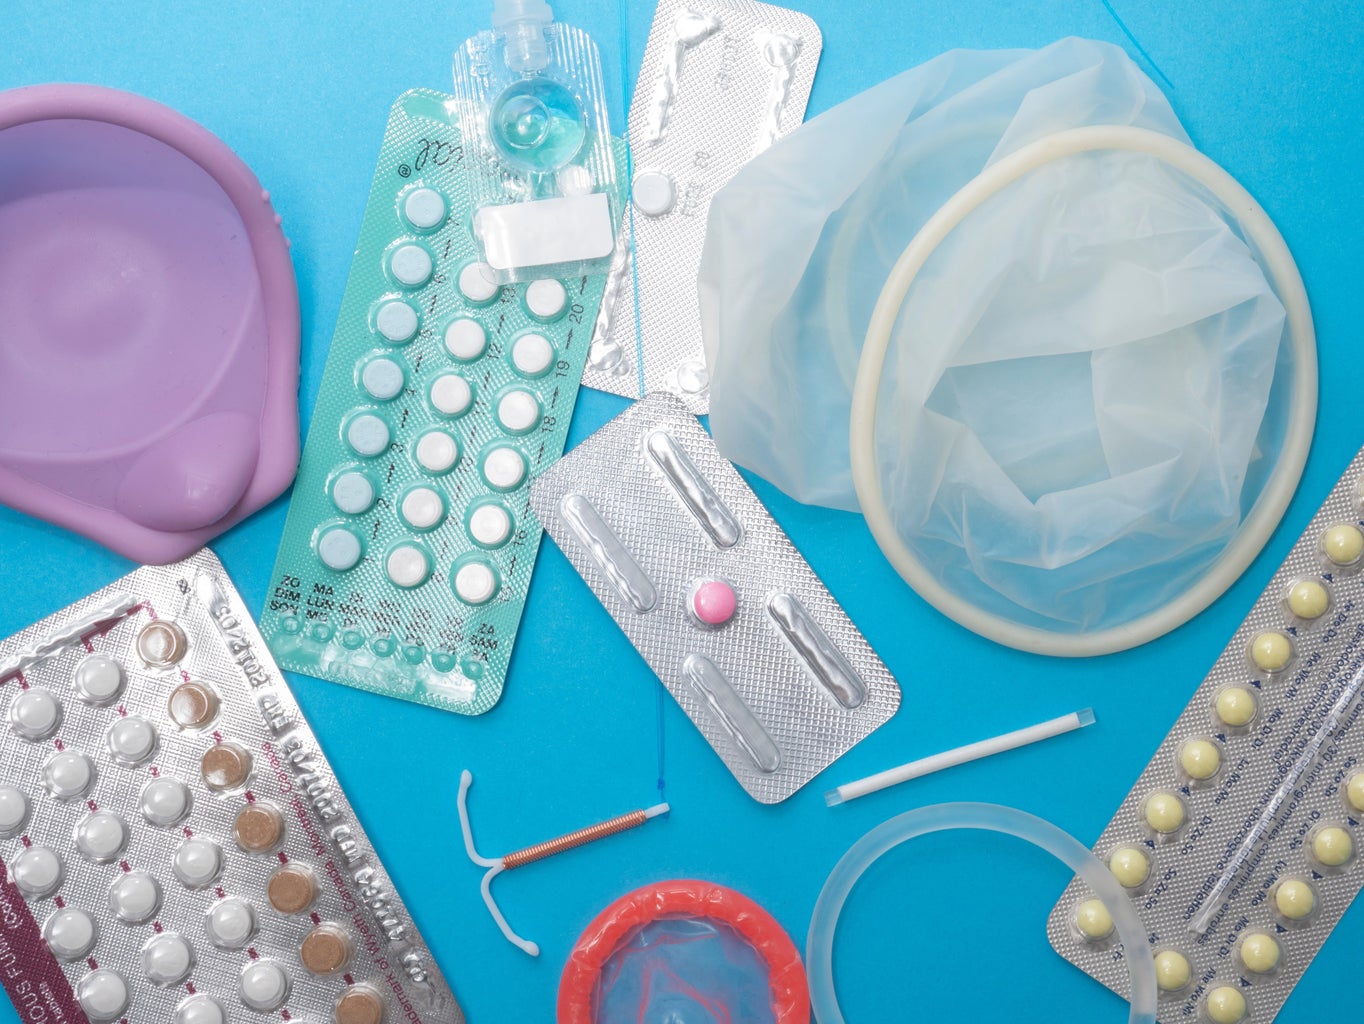 array of contraceptives